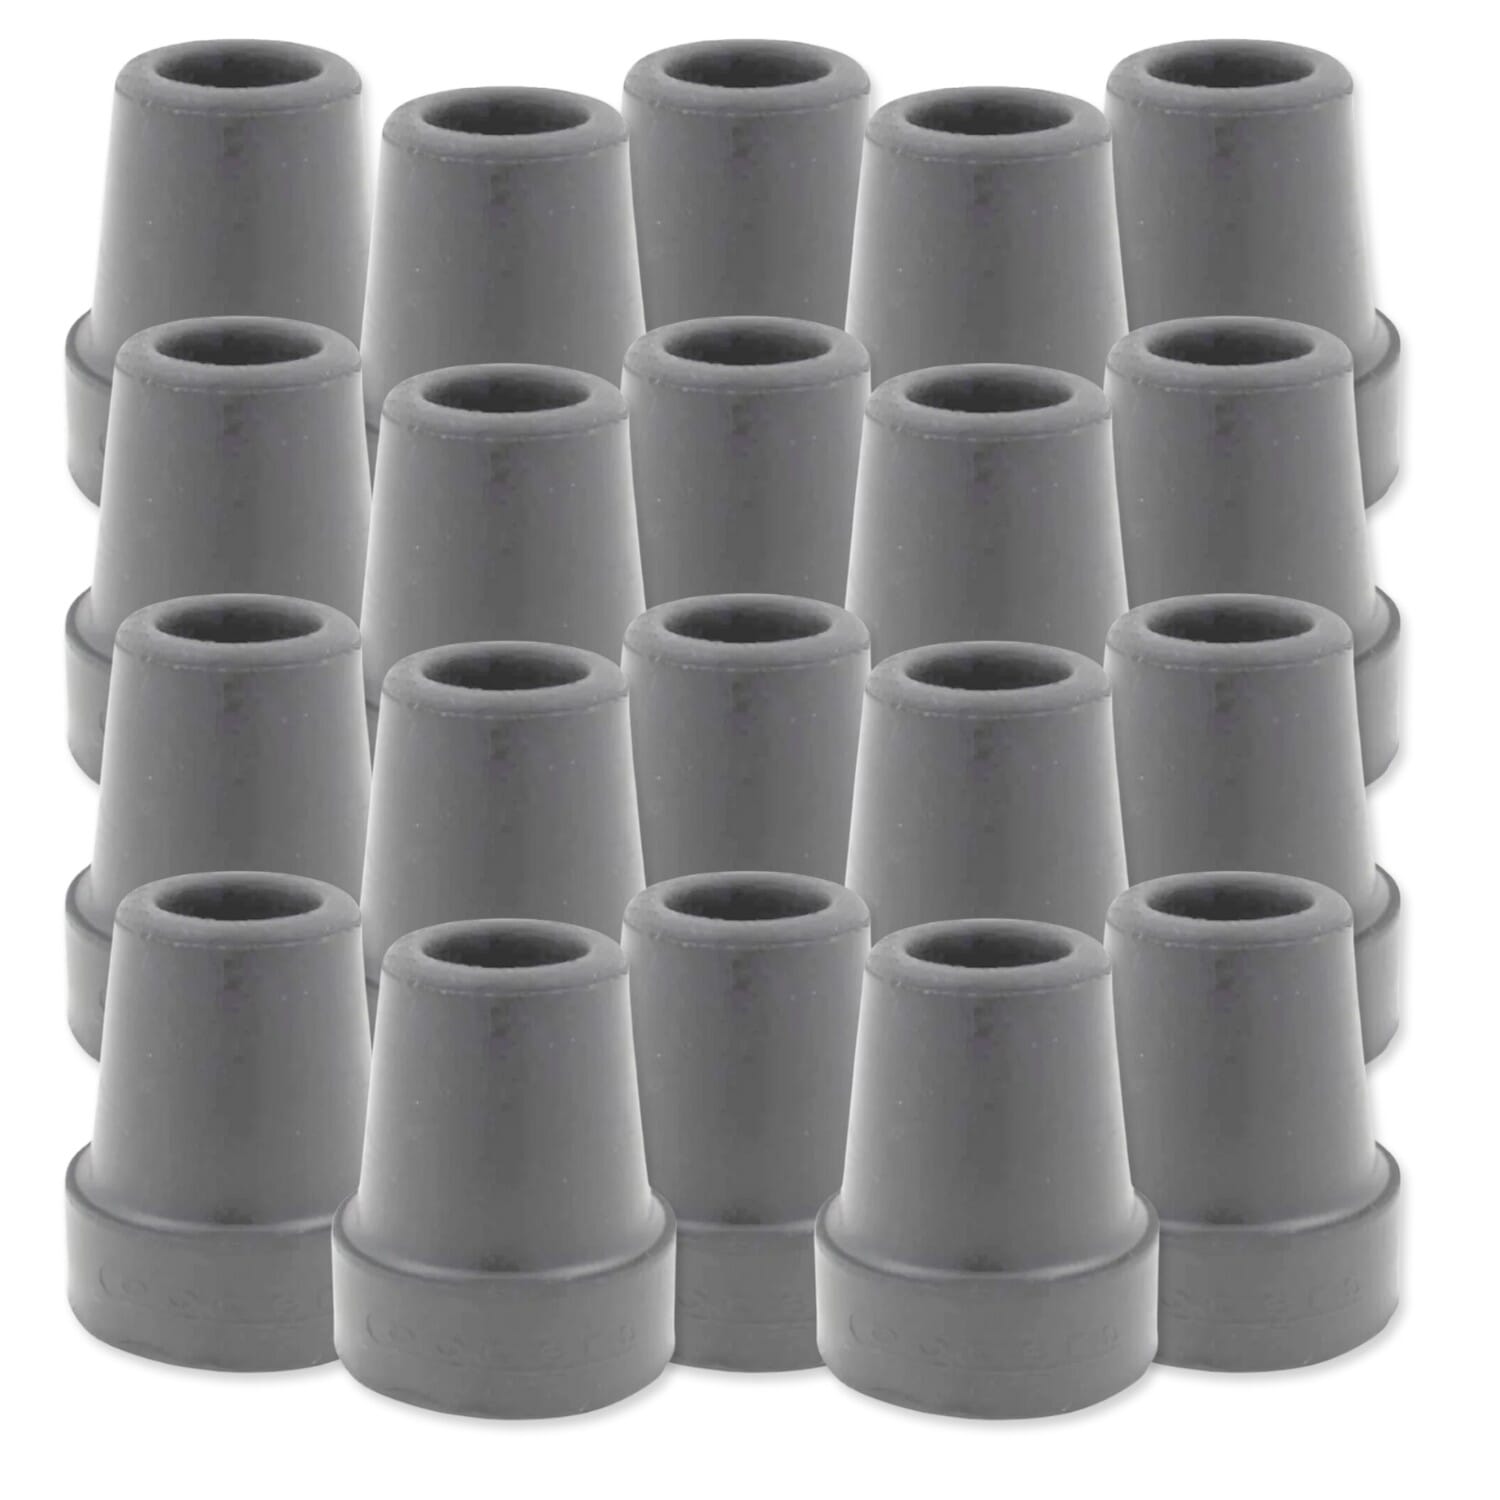 View Rubber Ends For Walking Sticks Rubber Ferrules 28mm grey pack of 20 information